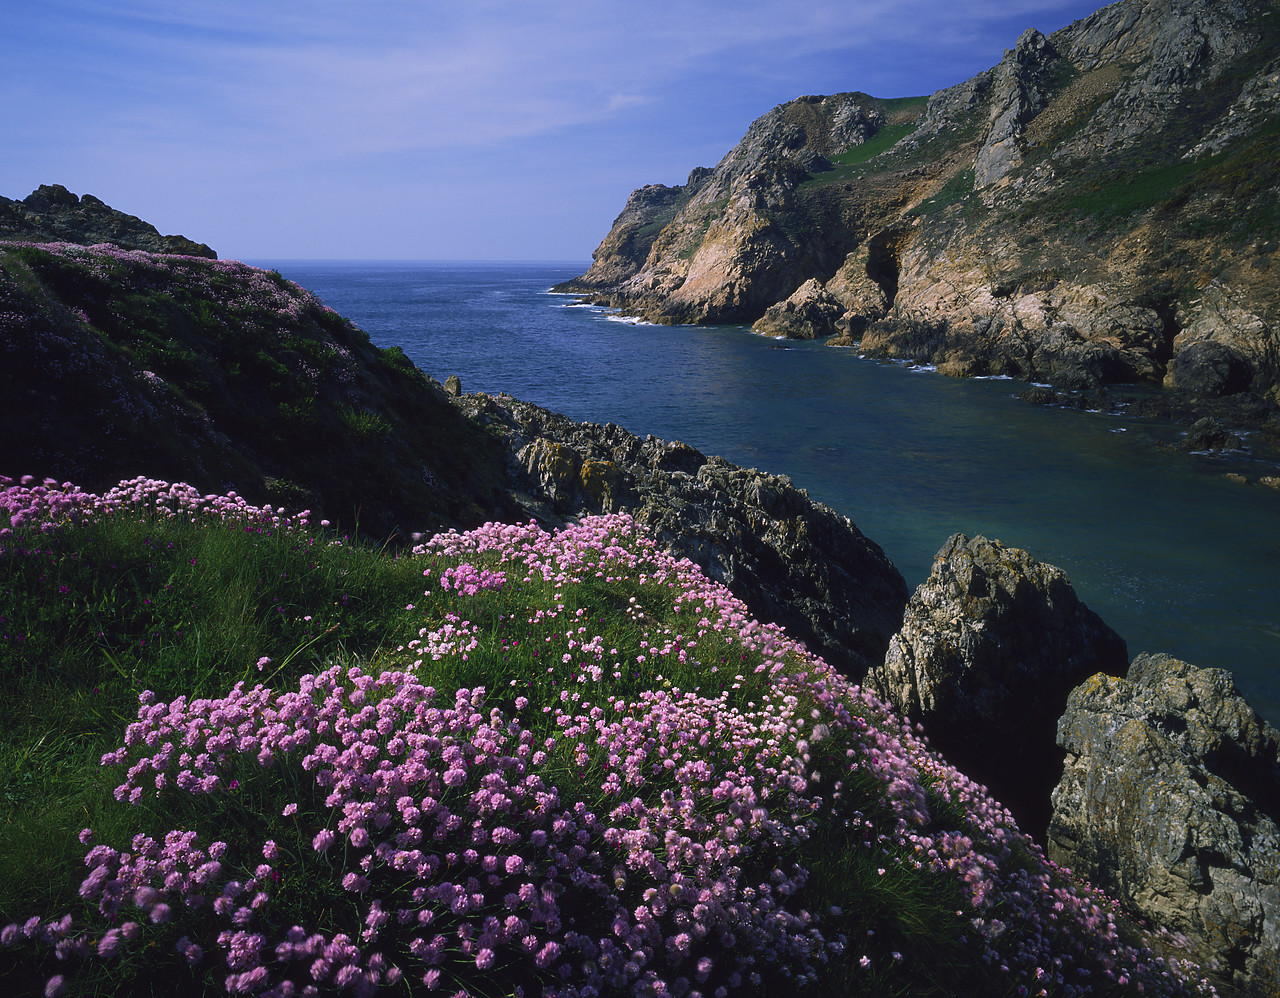 #913527-1 - Cliffs covered in Thrift, Le Puleq Headland, Jersey, Channel Islands